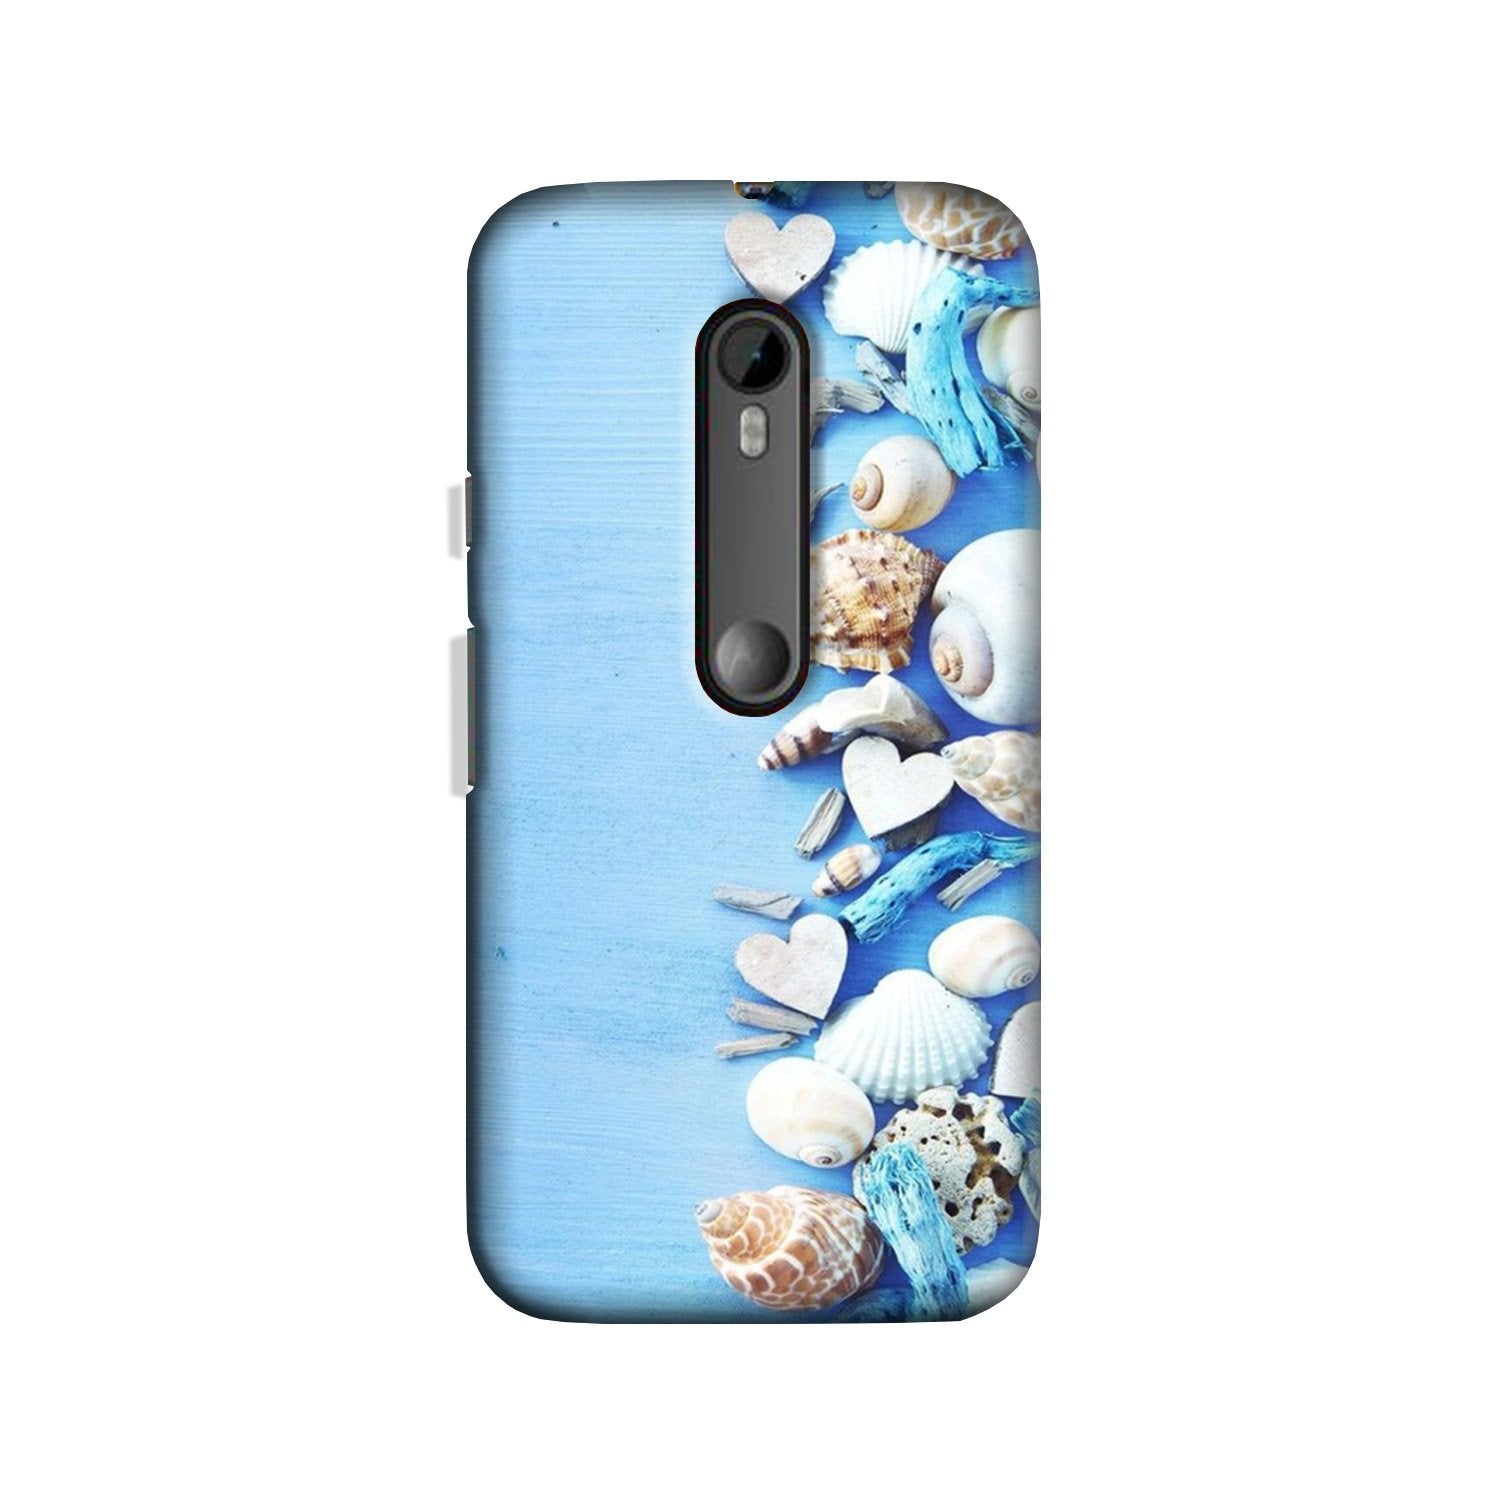 Sea Shells2 Case for Moto X Force